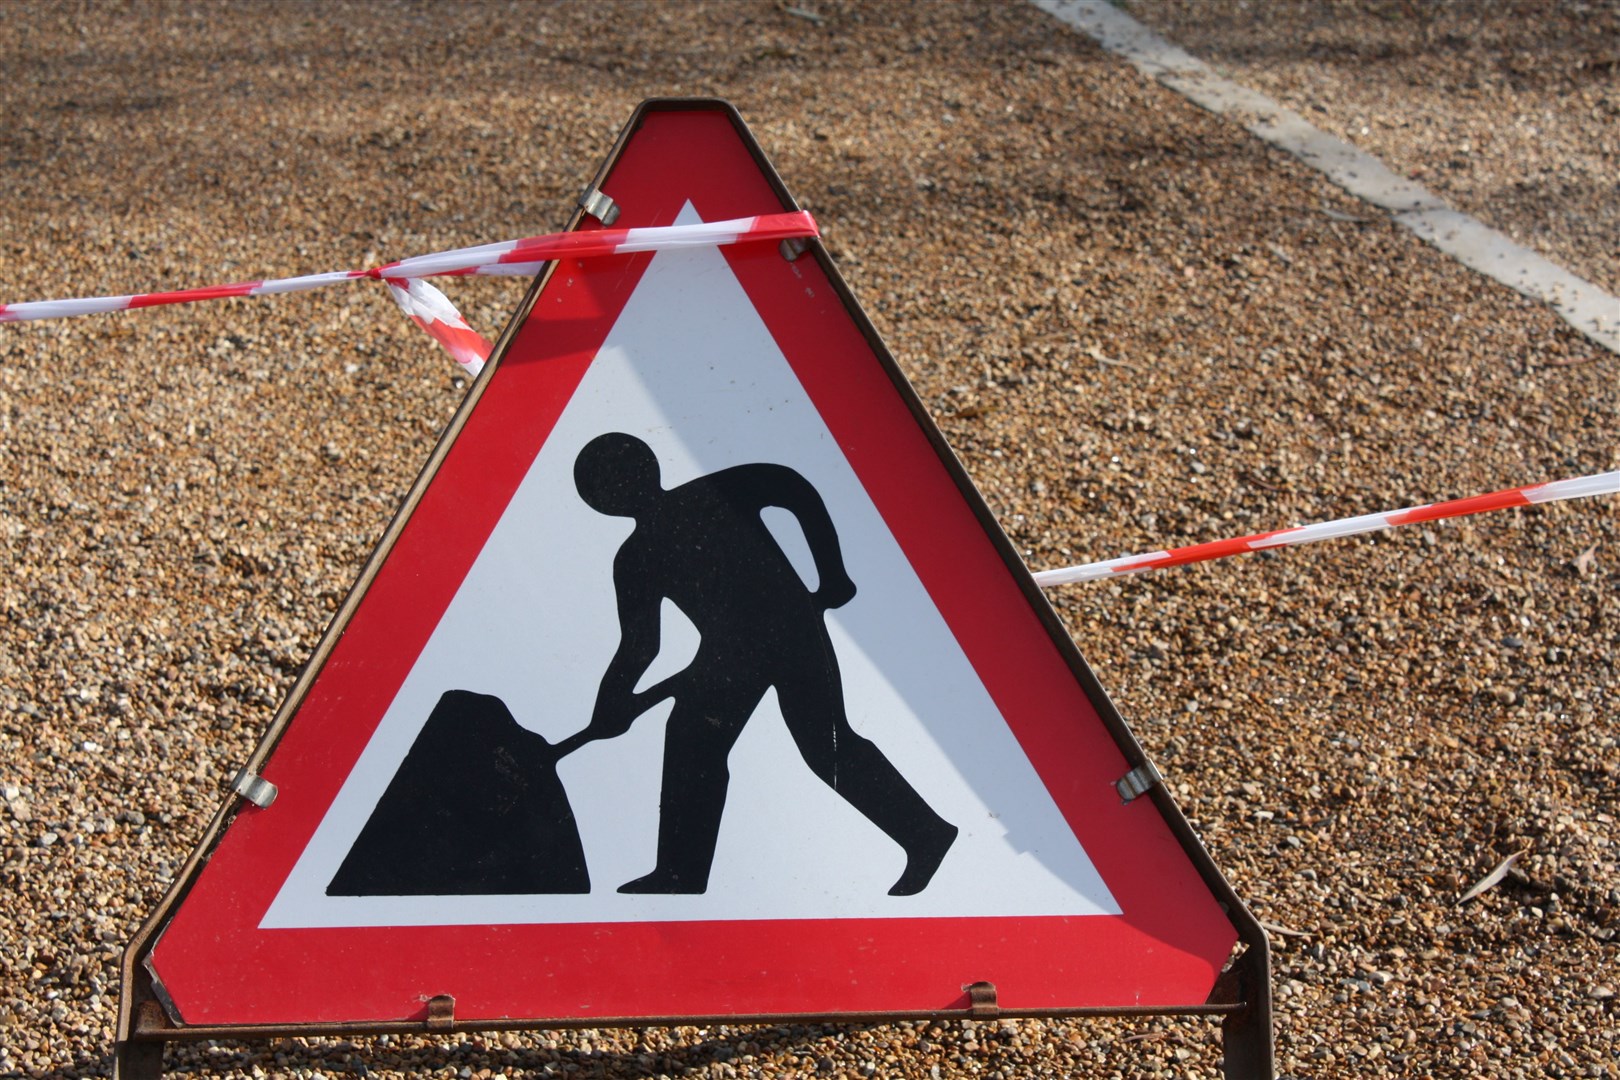 Roadworks are planned on the A87.